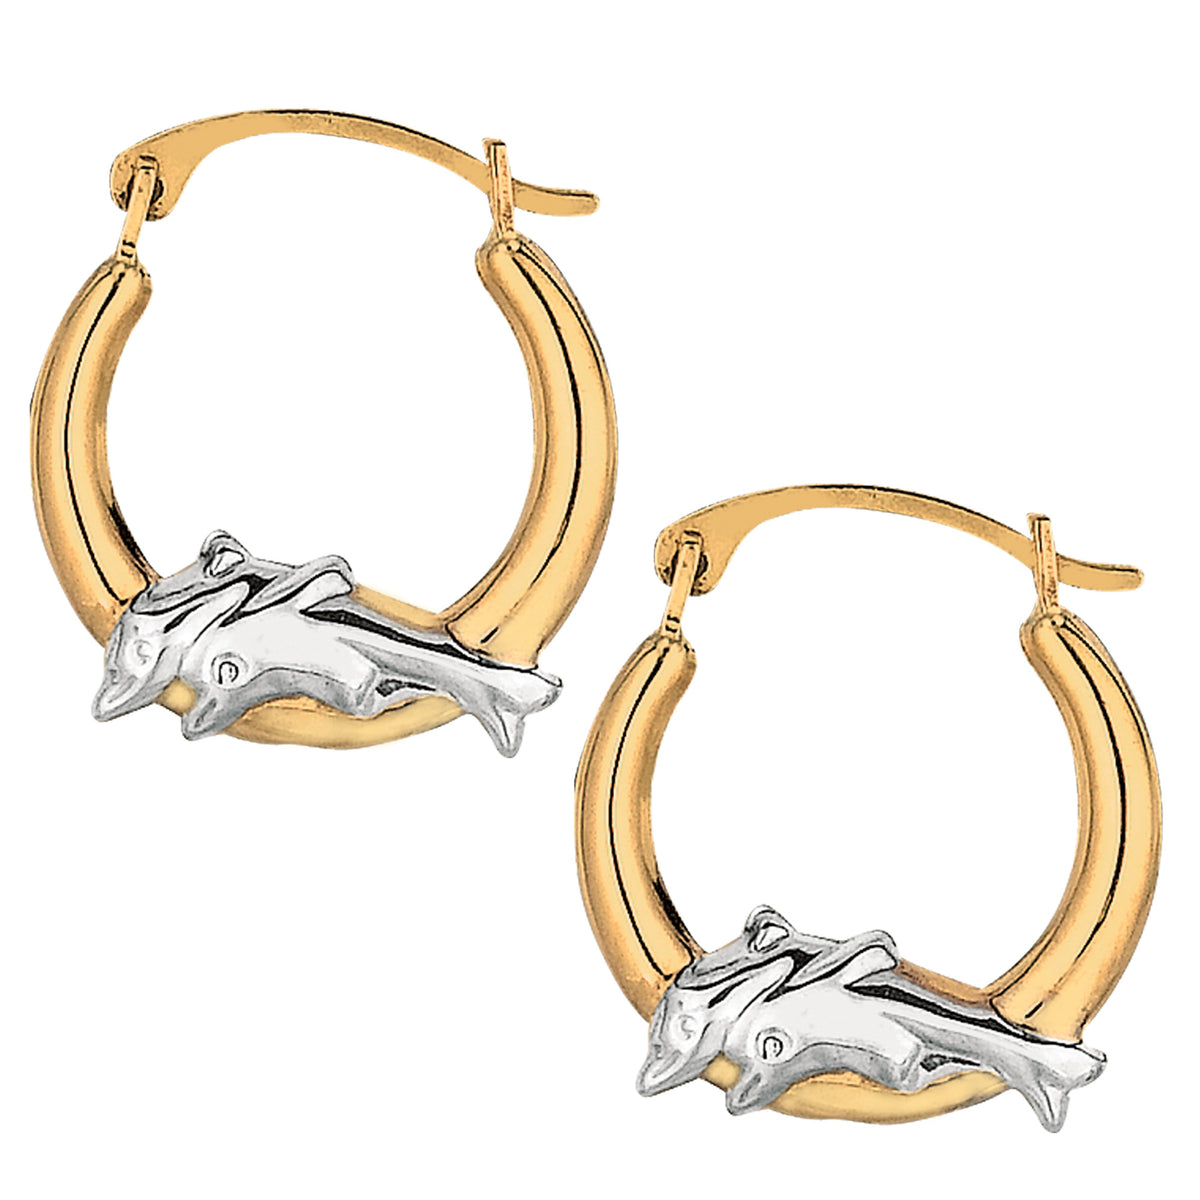 10k 2 Tone White And Yellow Gold Round Shape Hoop Earrings With Dolphins, Diameter 15mm fine designer jewelry for men and women